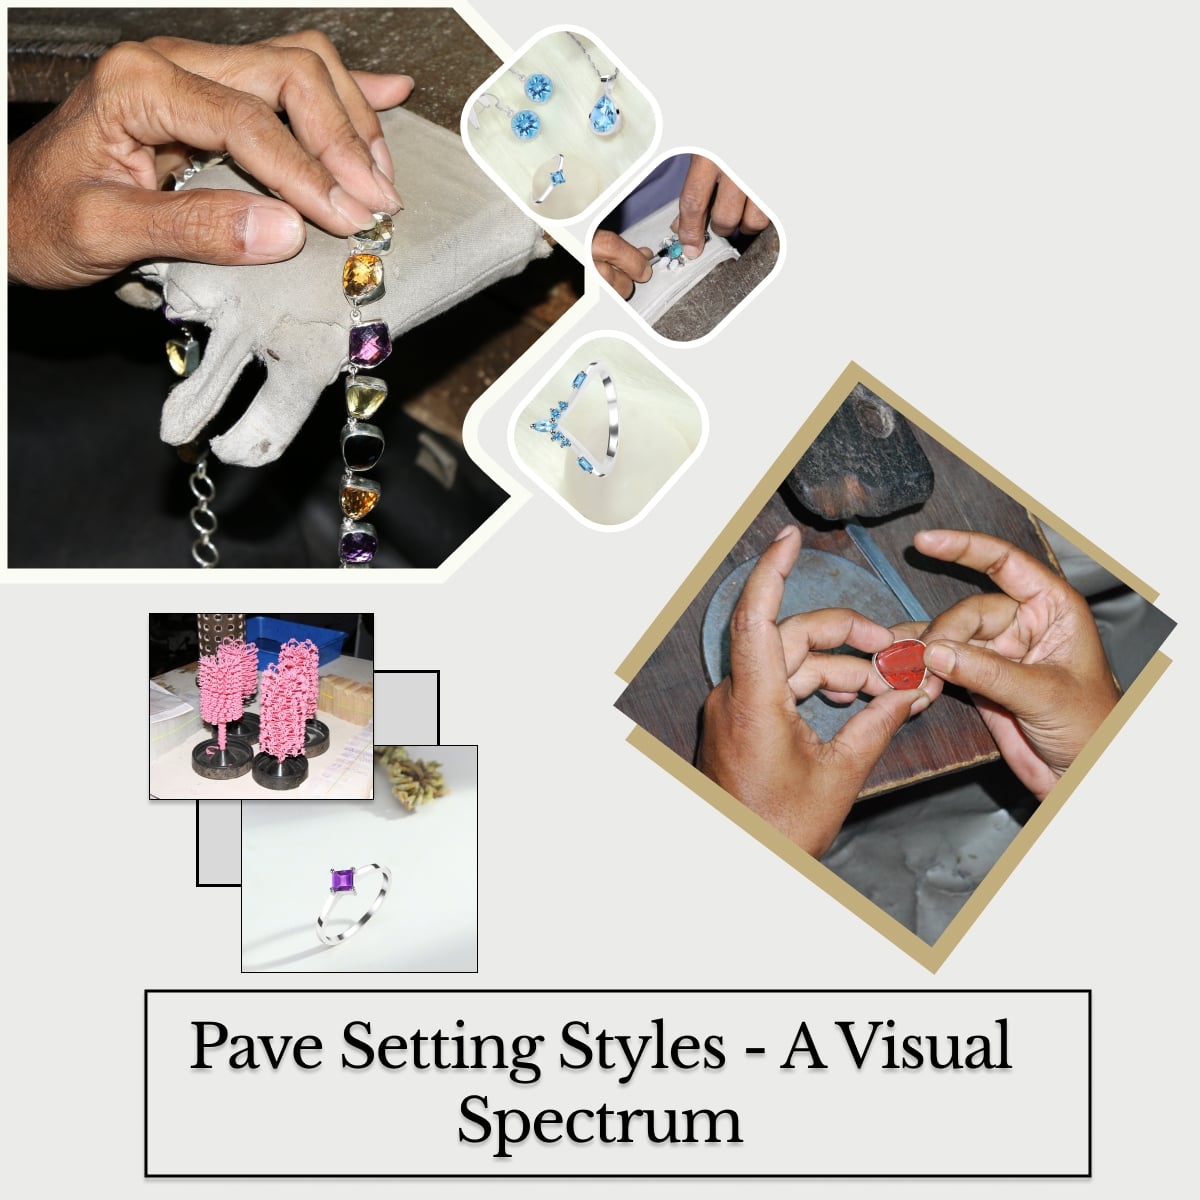 Types of Pave Settings